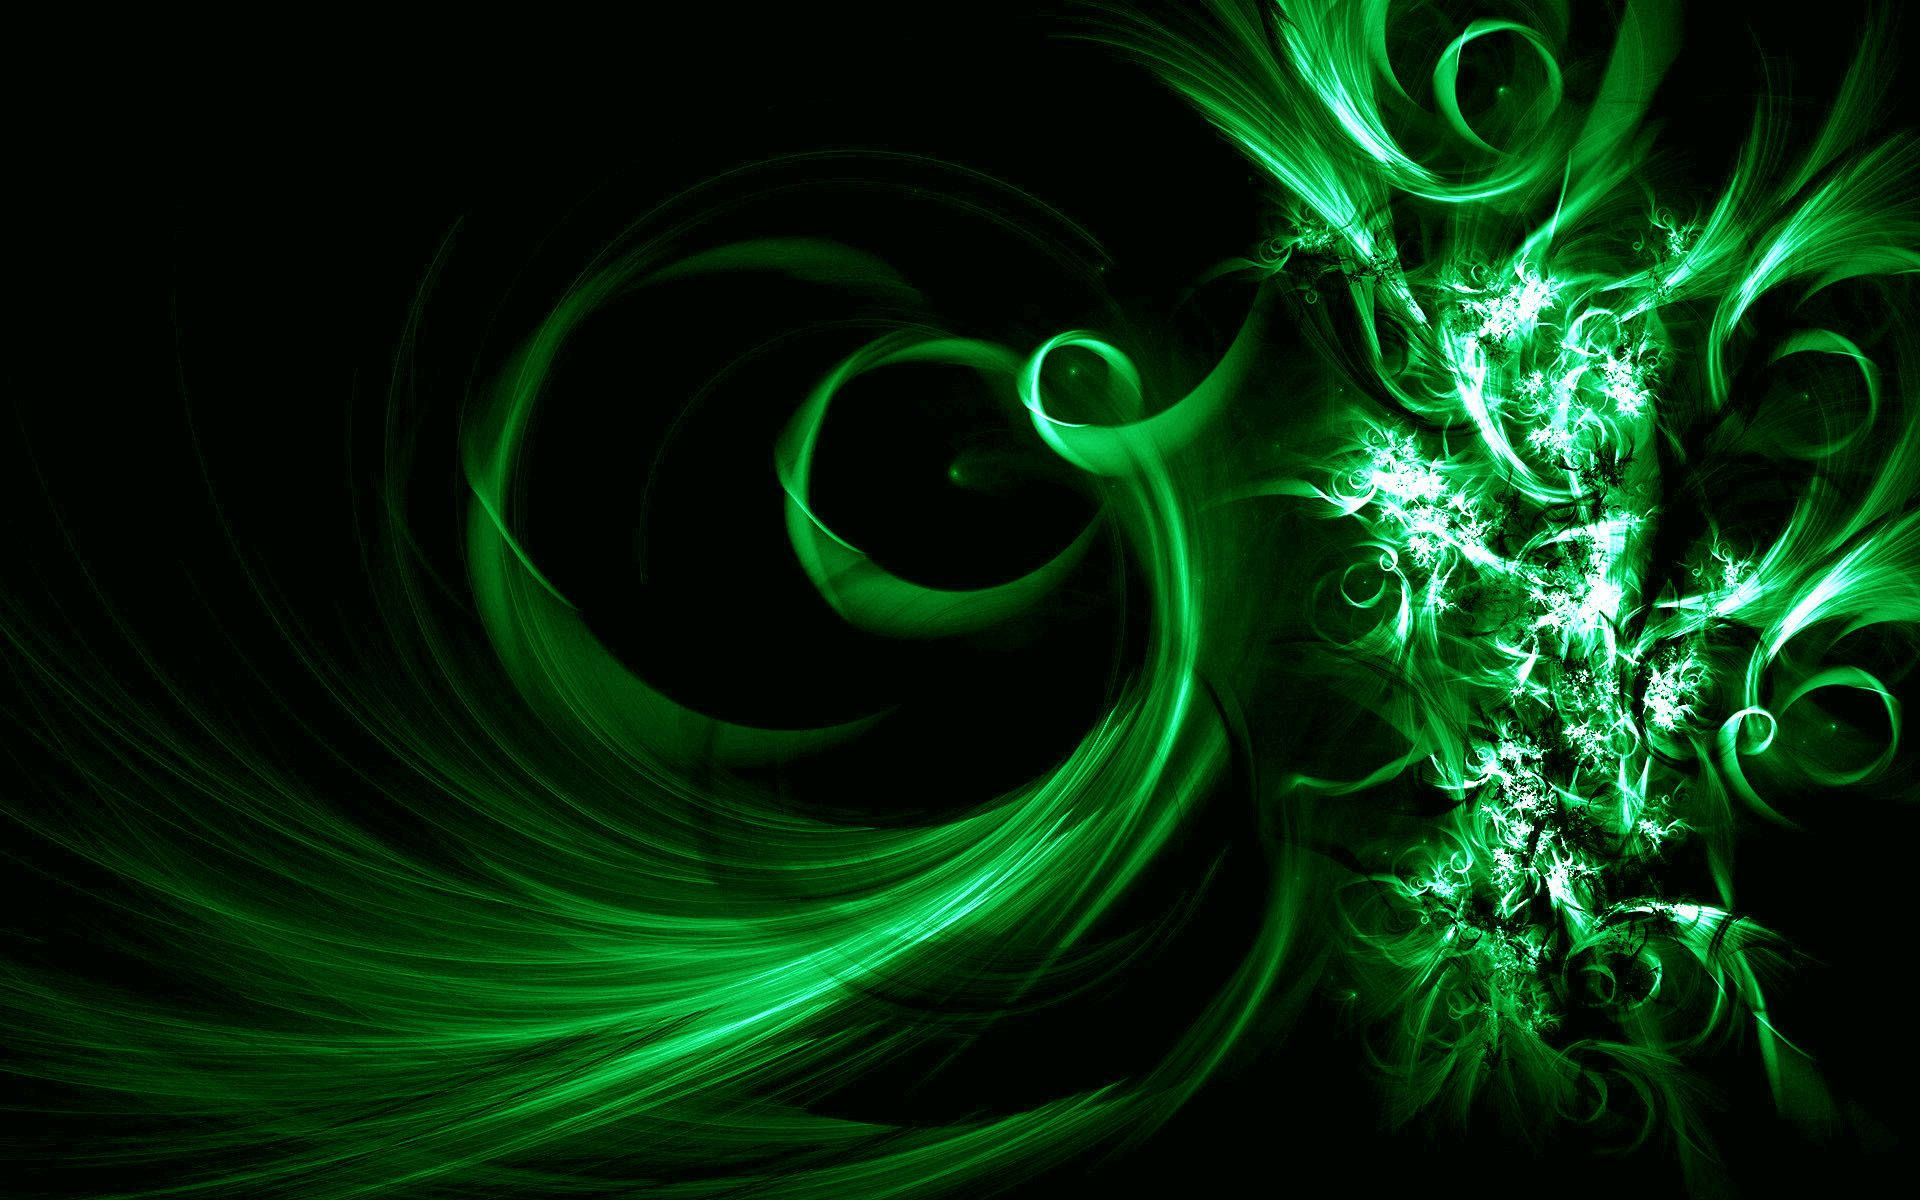 Glowing Green Spiral Abstract Background